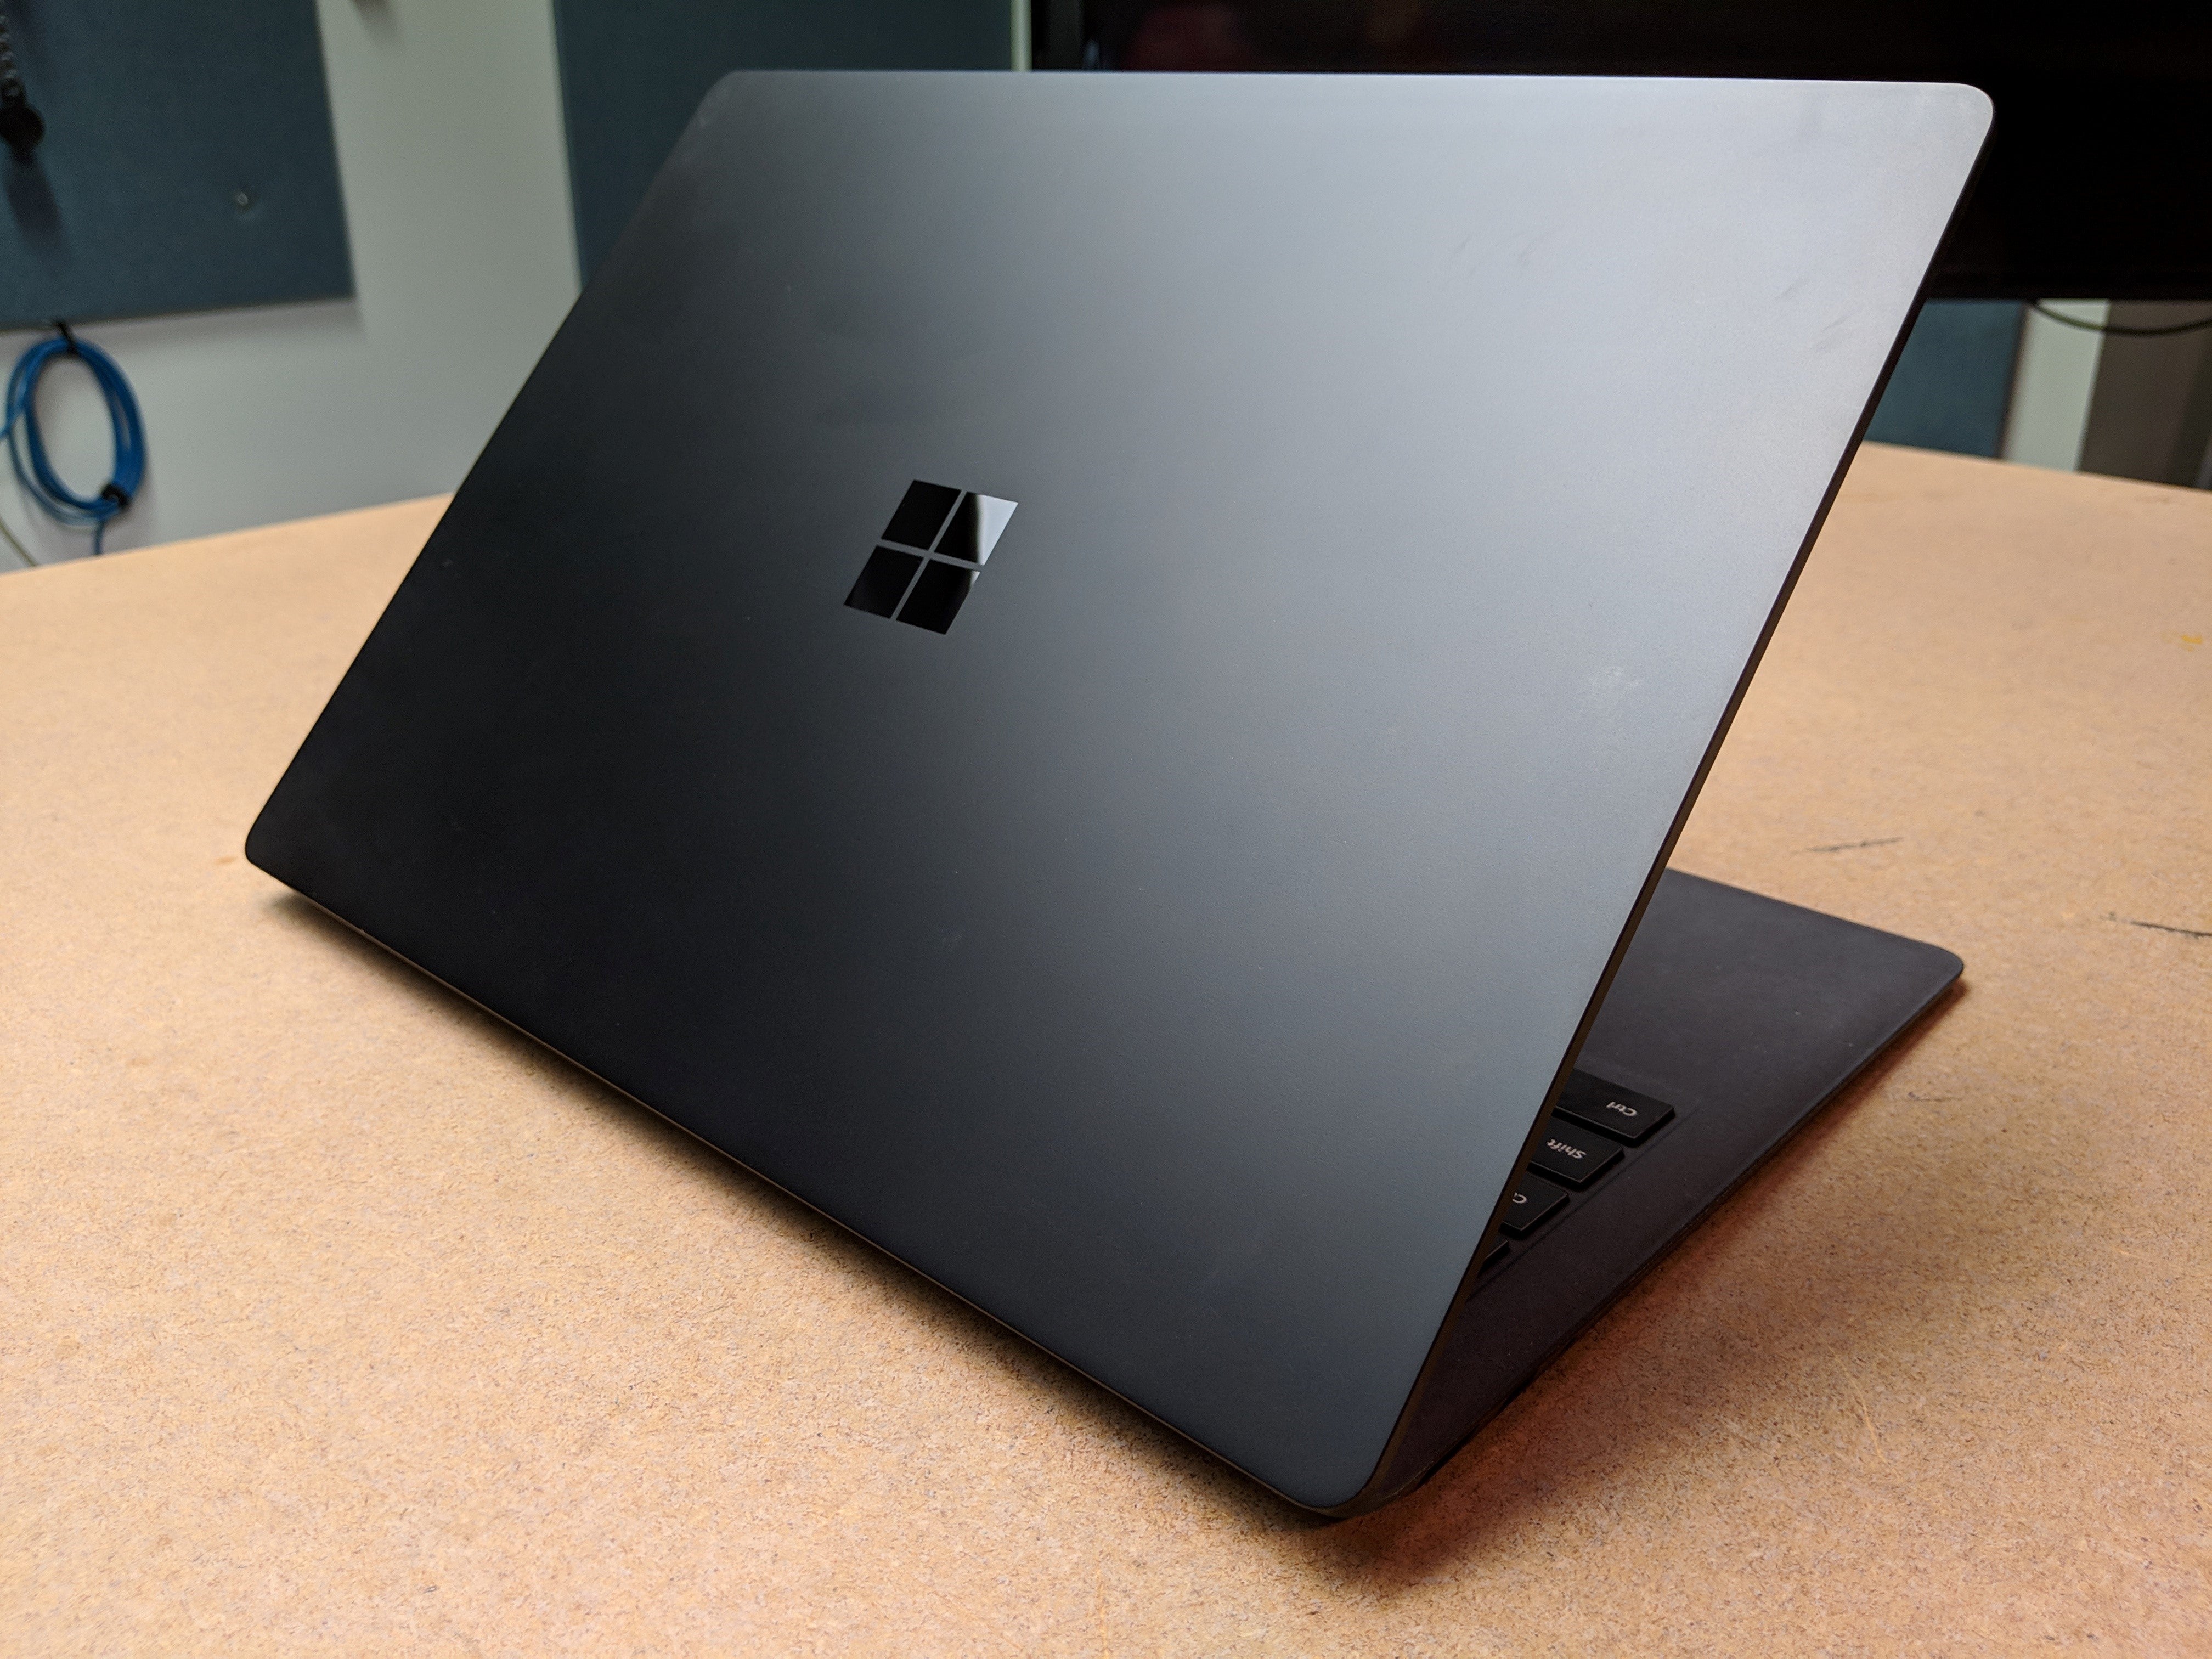 Microsoft Surface Laptop 2 review: A once-great laptop now is merely